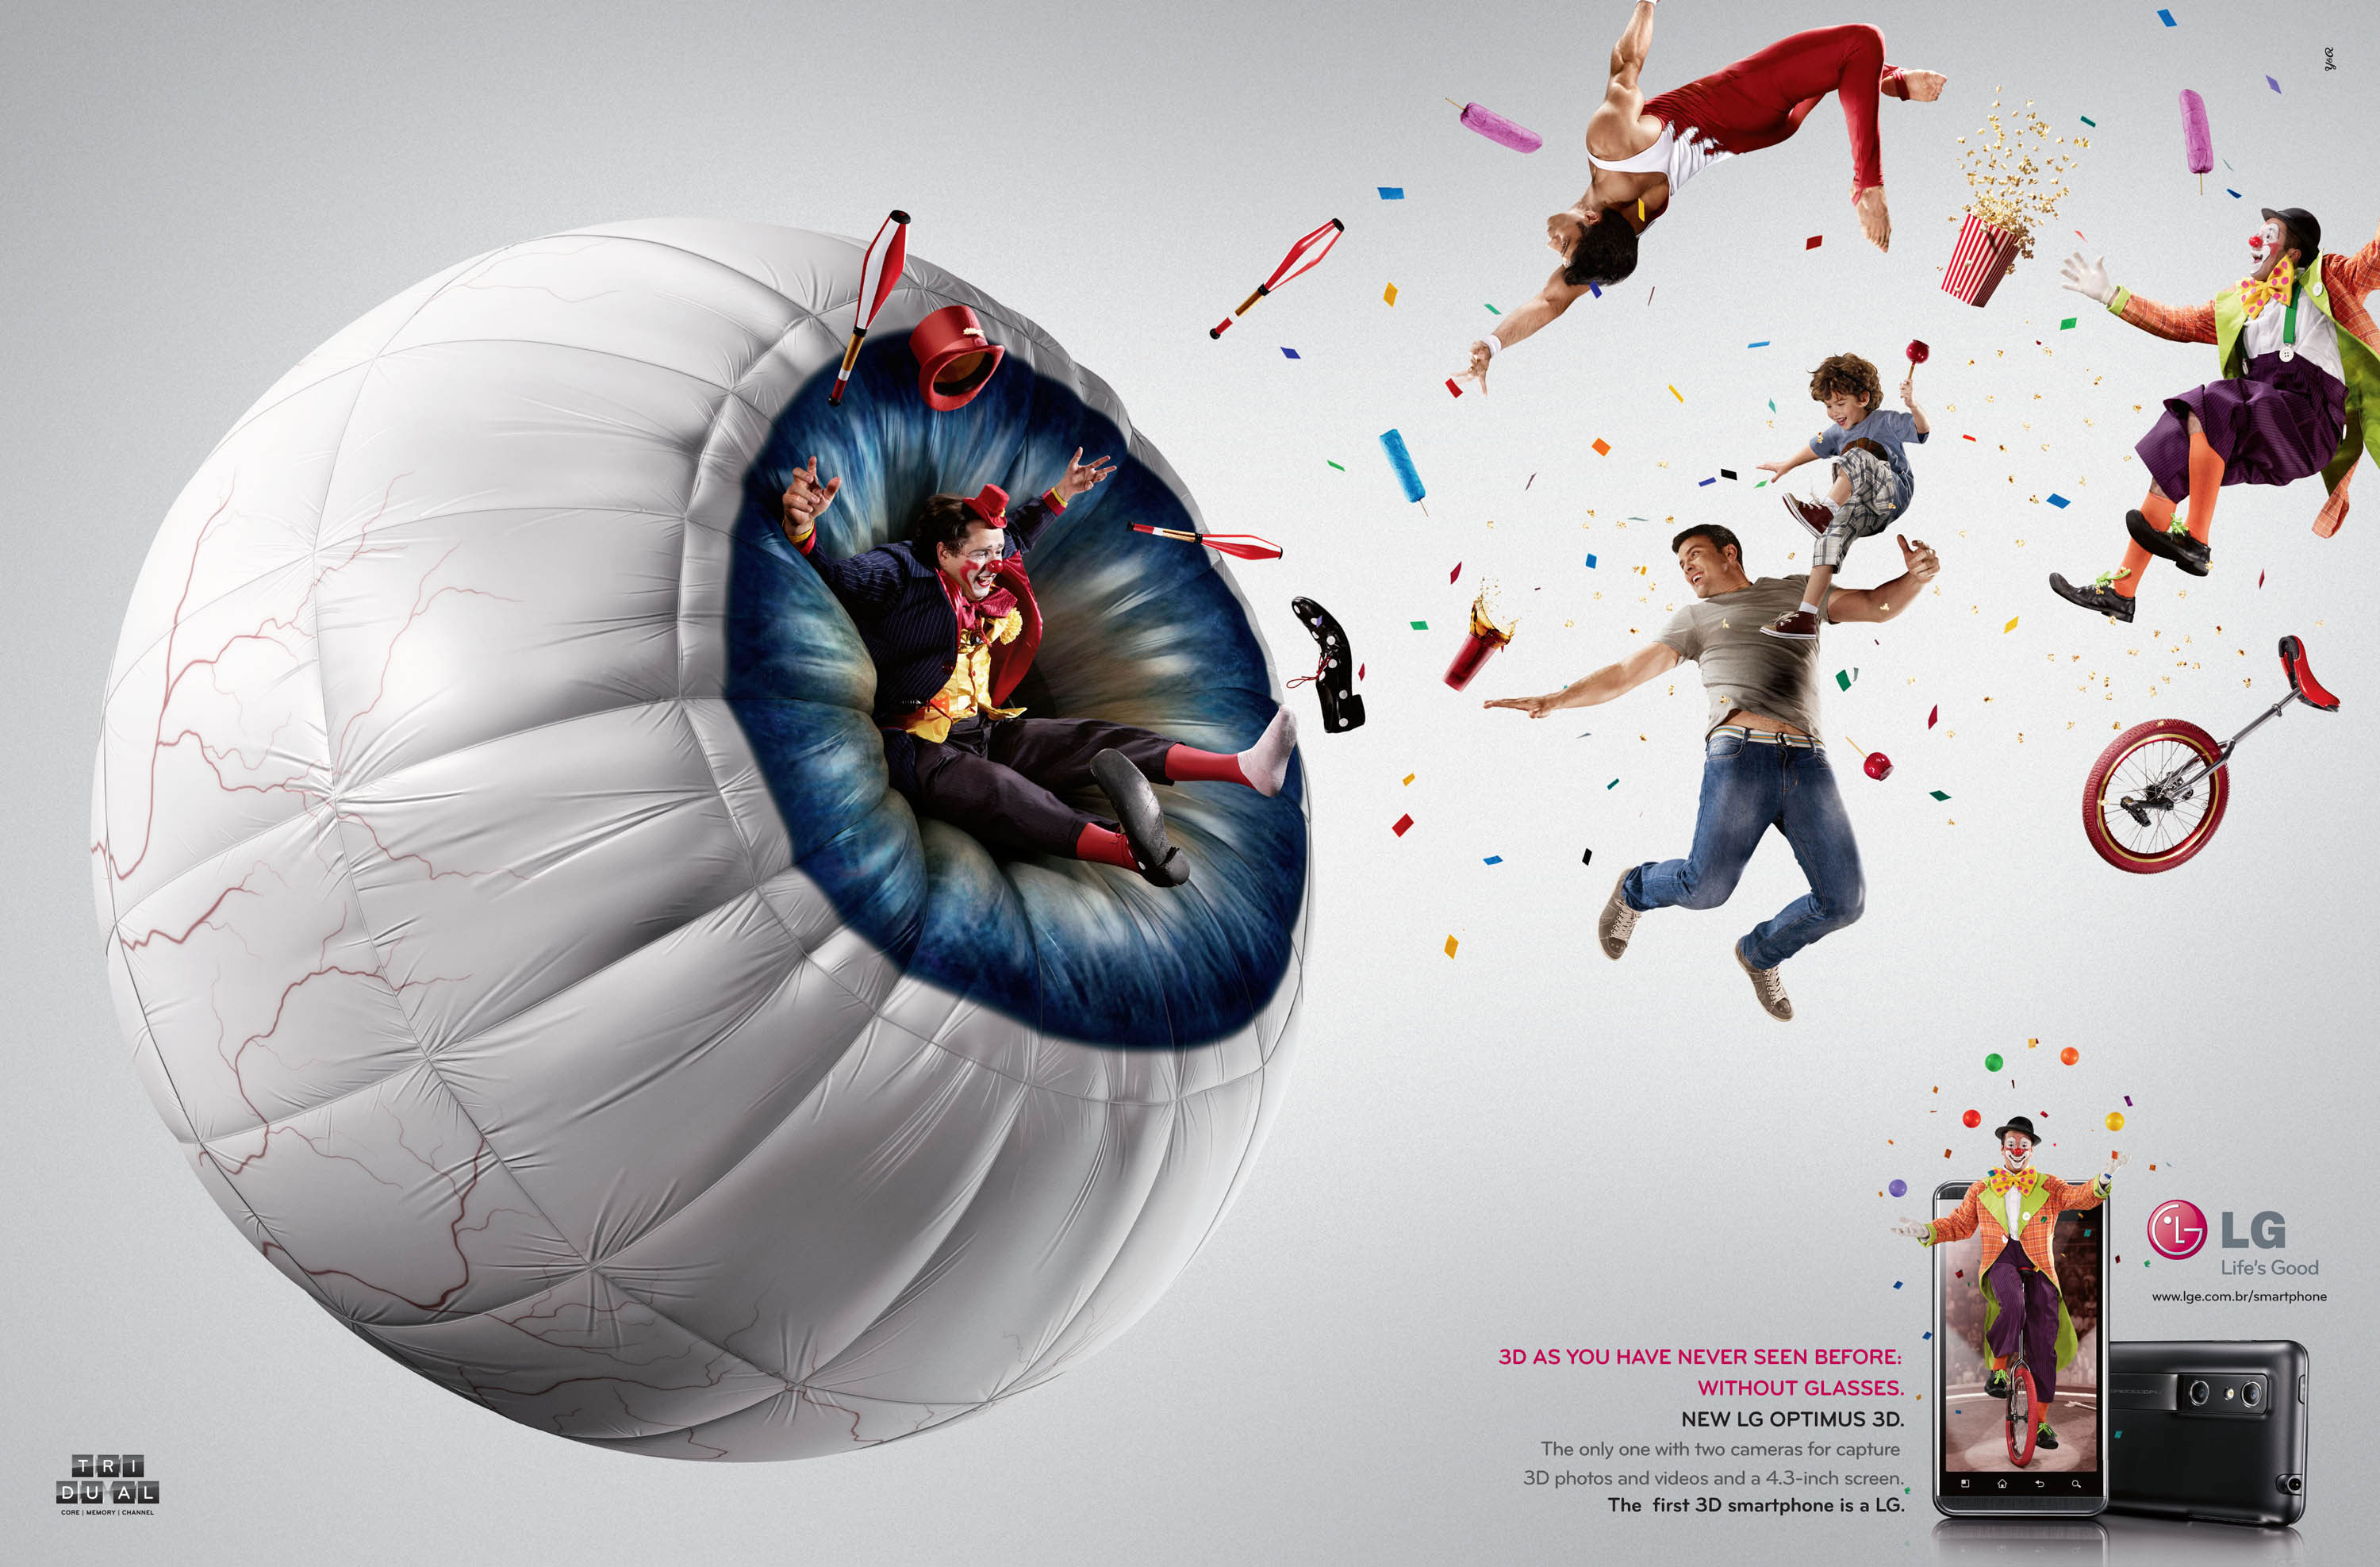 500 Creative And Cool Advertisements